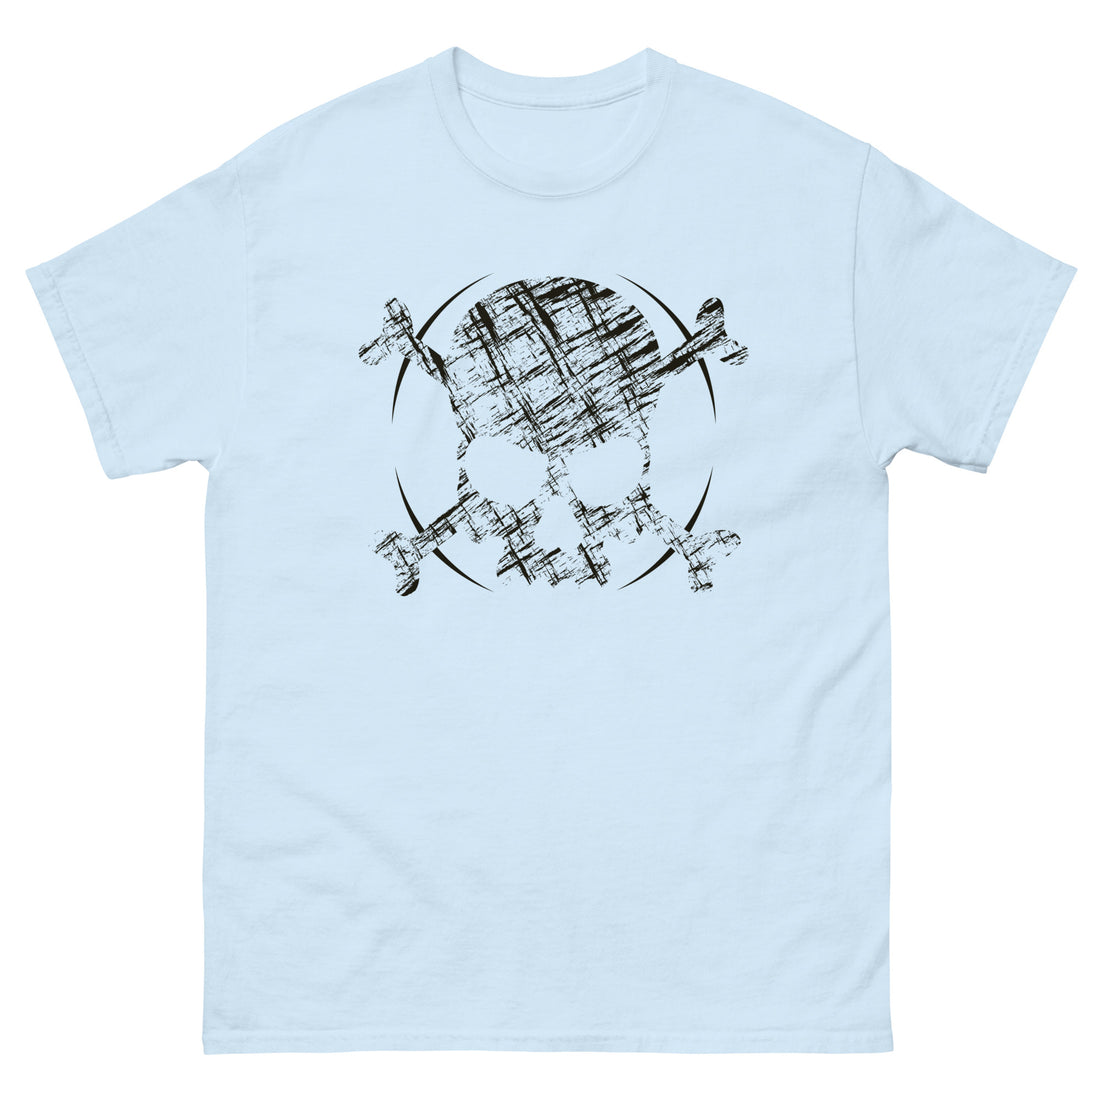 A light blue t-shirt adorned with a roughly cross-hatched skull and crossbones in black.  Solid black arcs give the image the impression of movement towards the end of the crossbones.